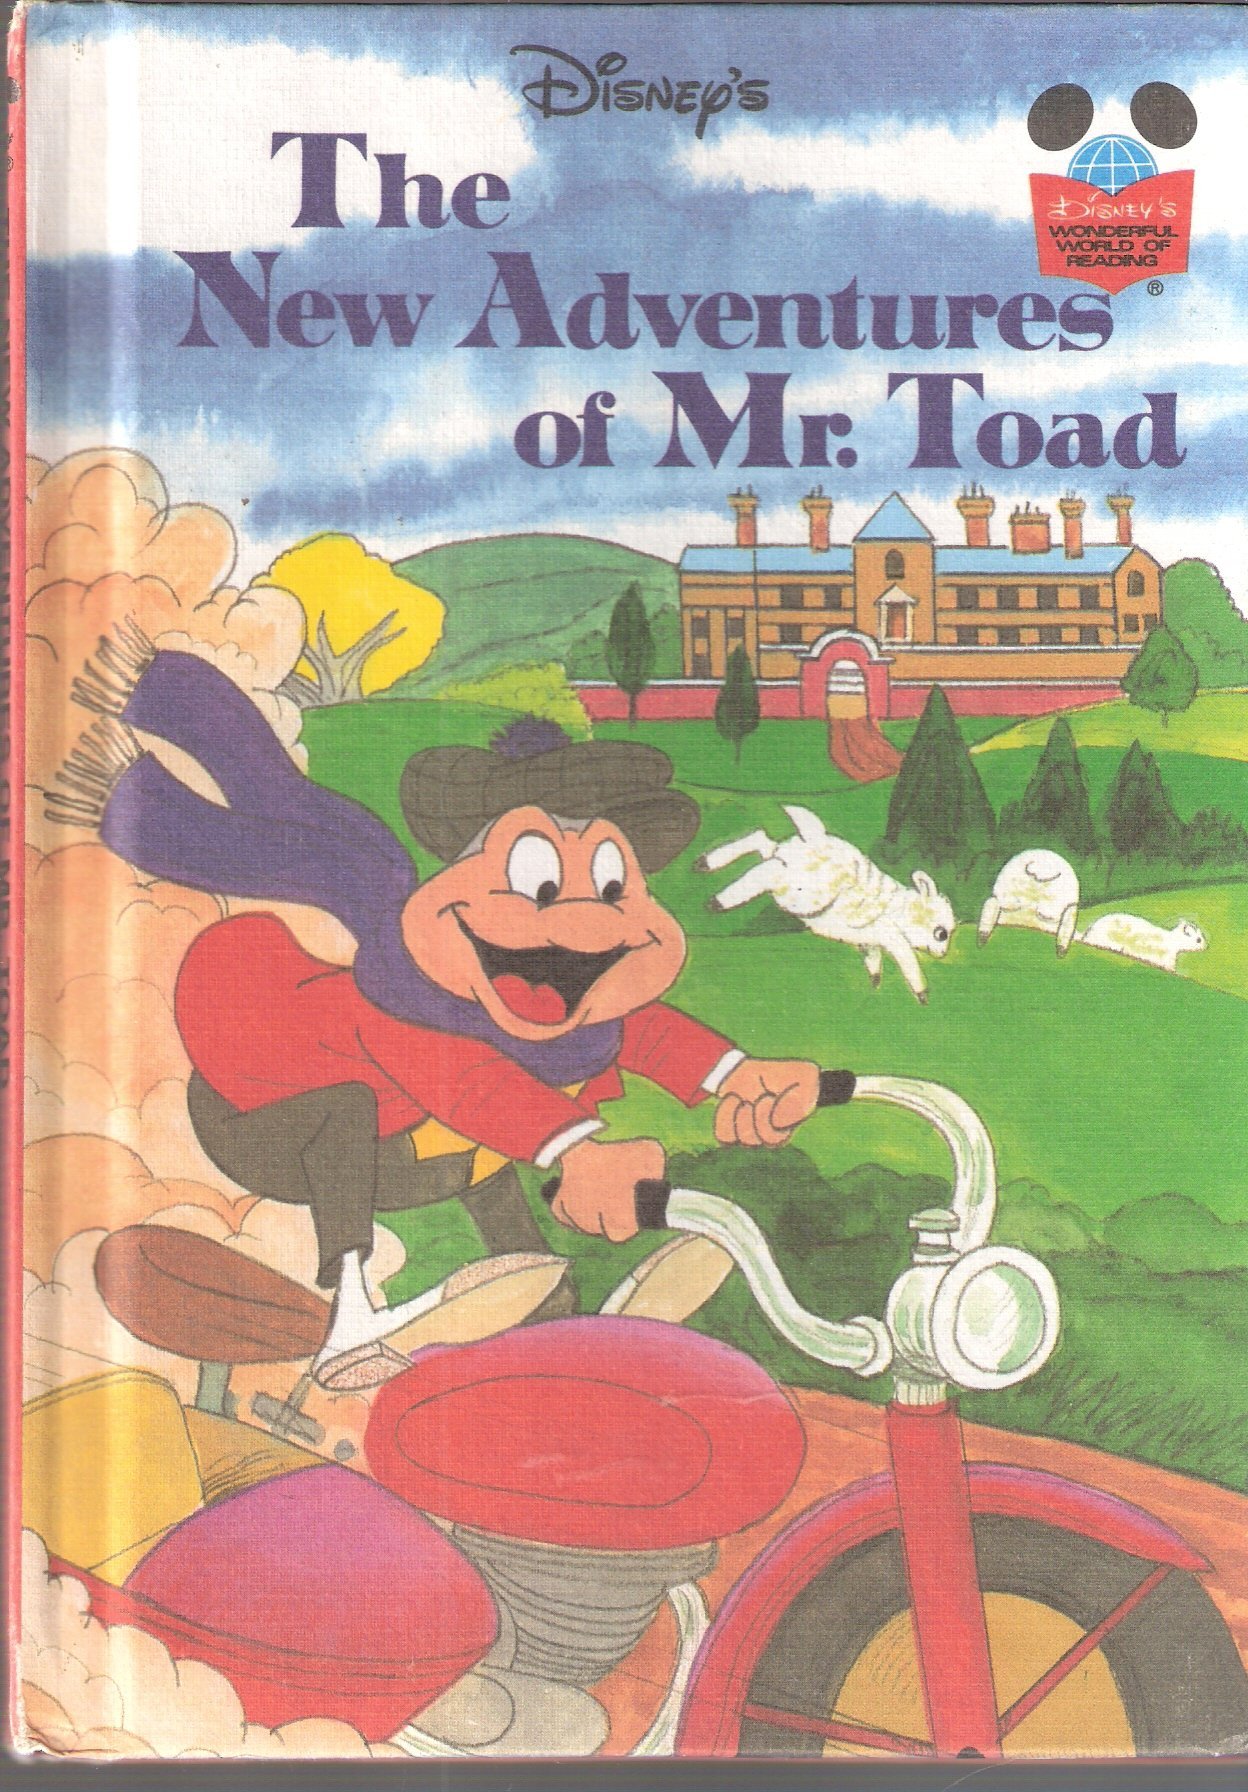 The Adventures of Mr. Toad